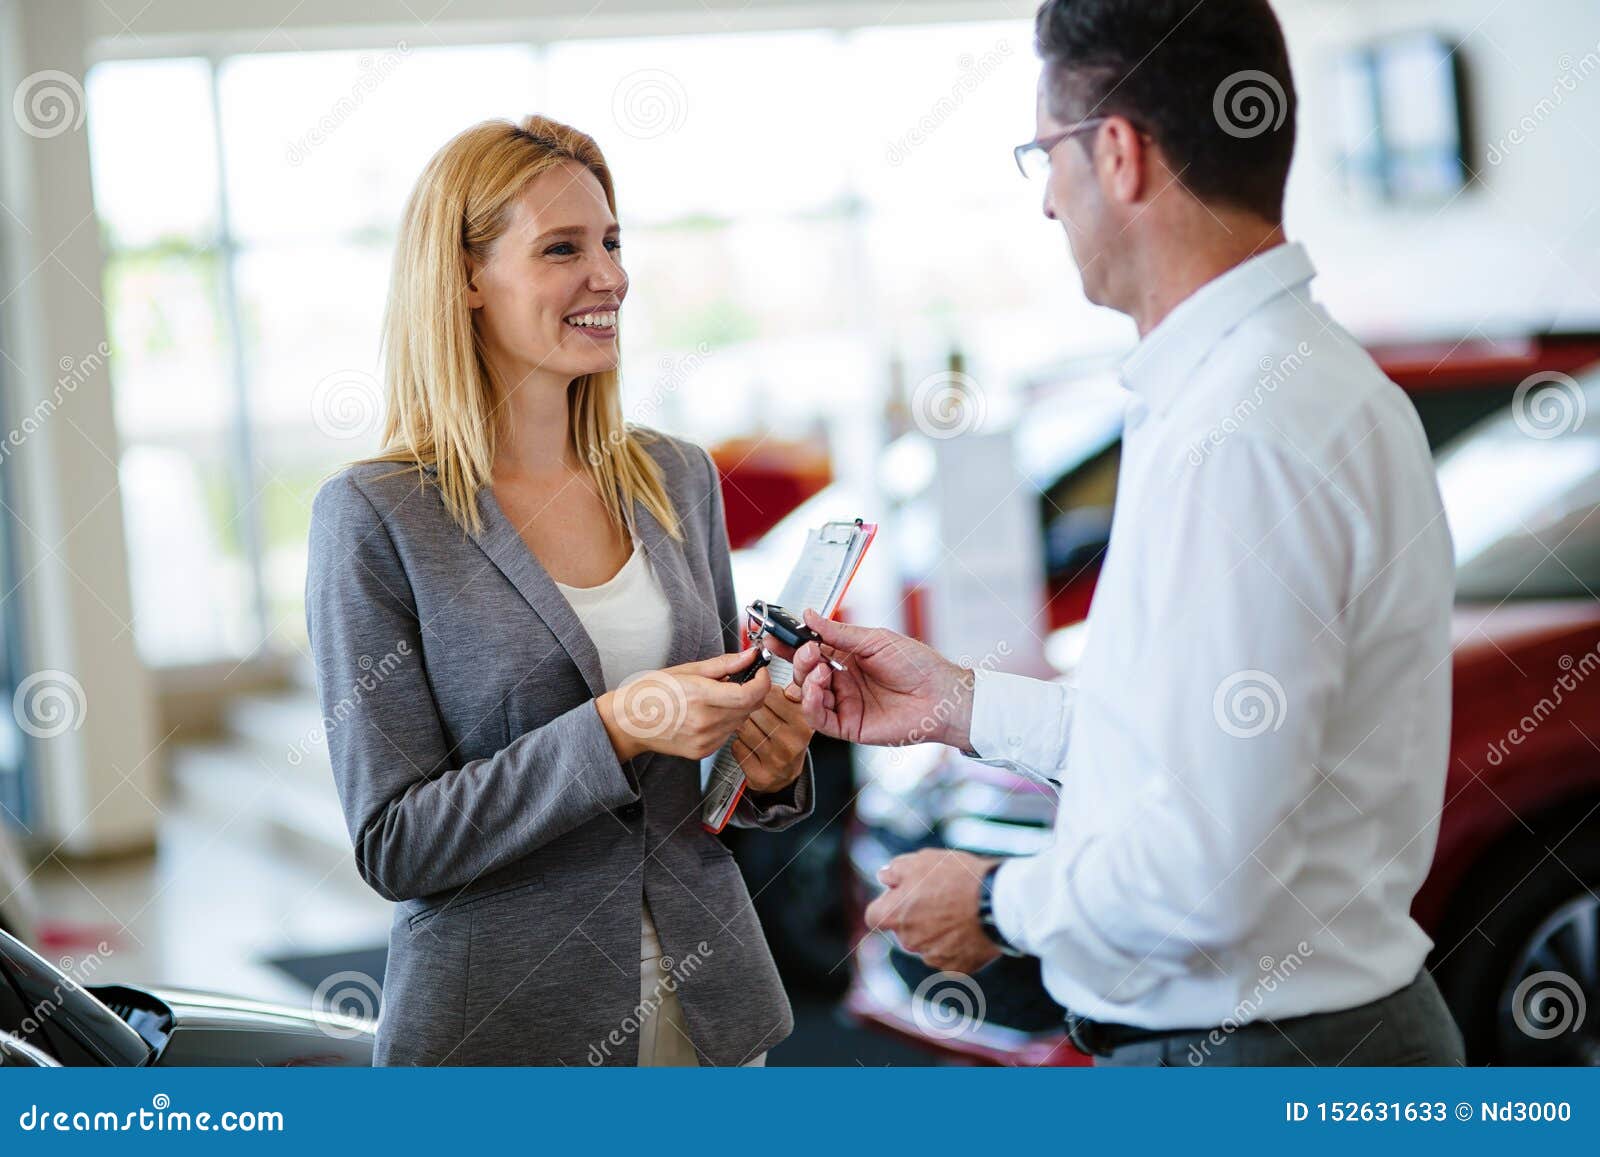 professional salesperson during work with customer at car dealership. giving keys to new car owner.